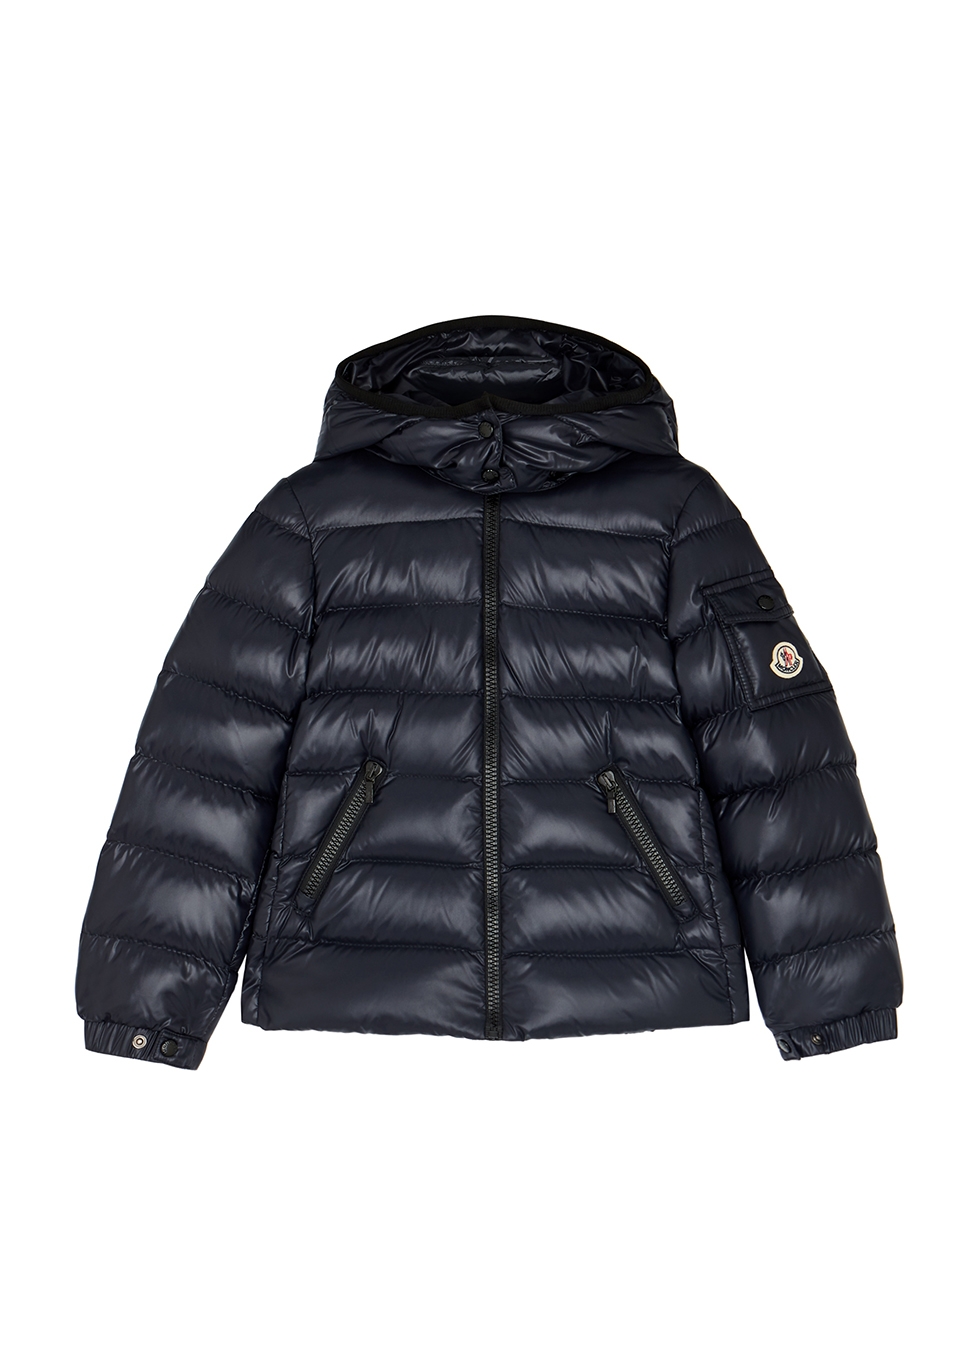 Moncler KIDS Bady navy quilted shell jacket (4-6 years) - Harvey Nichols